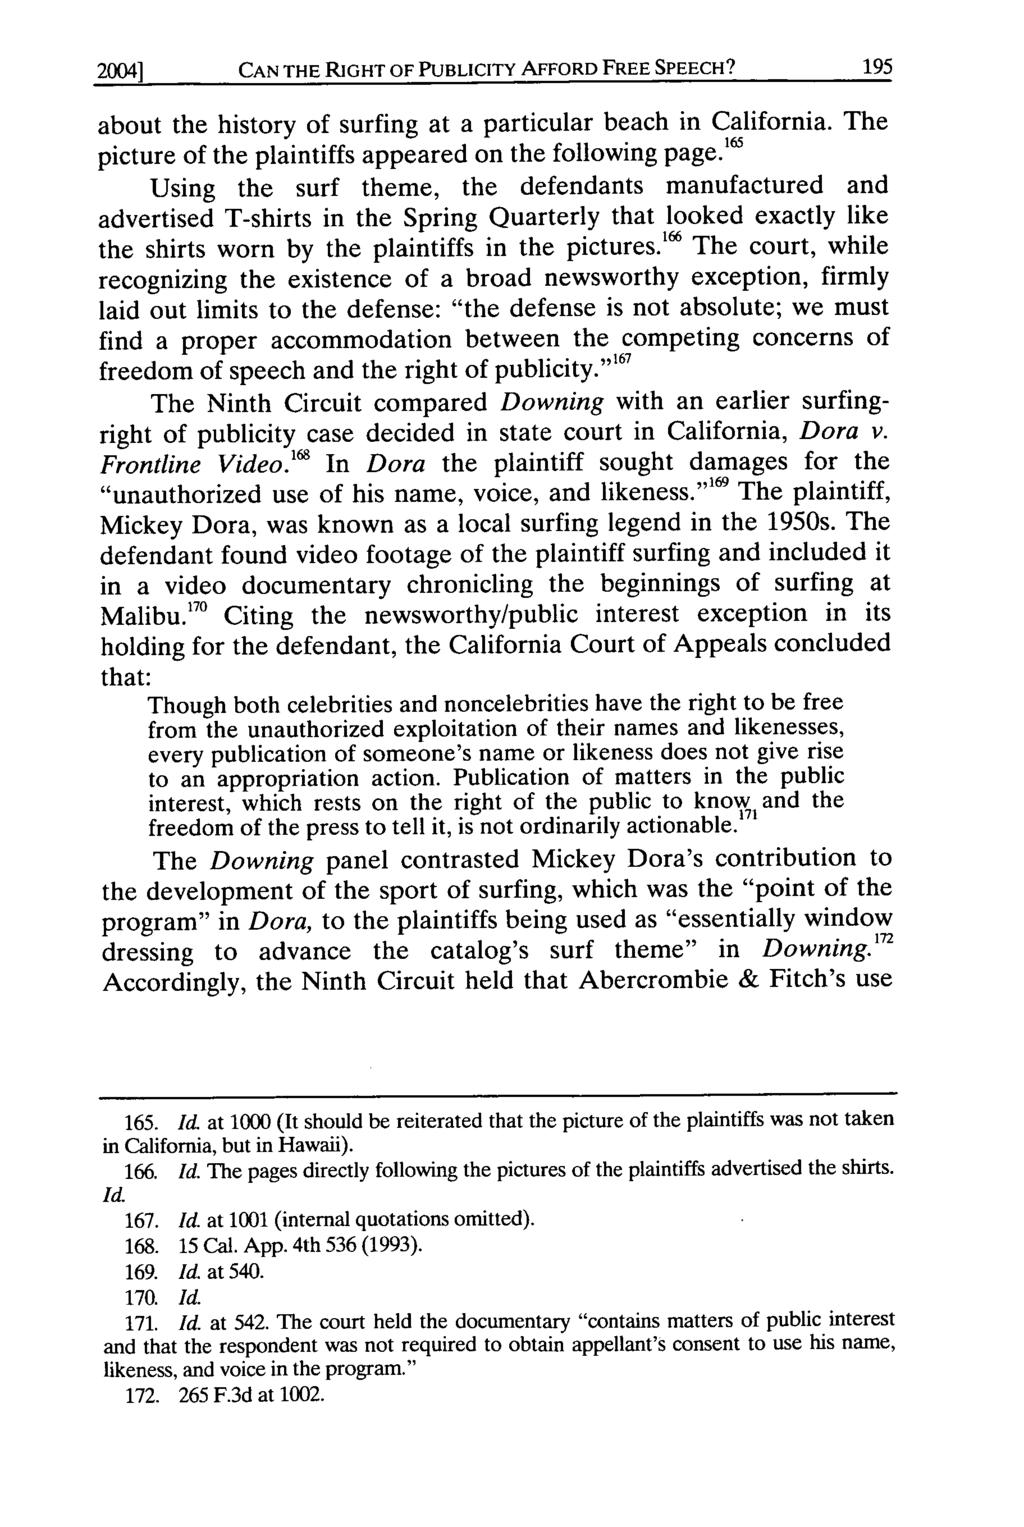 2004] CAN THE RIGHT OF PUBLICITY AFFORD FREE SPEECH? about the history of surfing at a particular beach in California. The picture of the plaintiffs appeared on the following page.